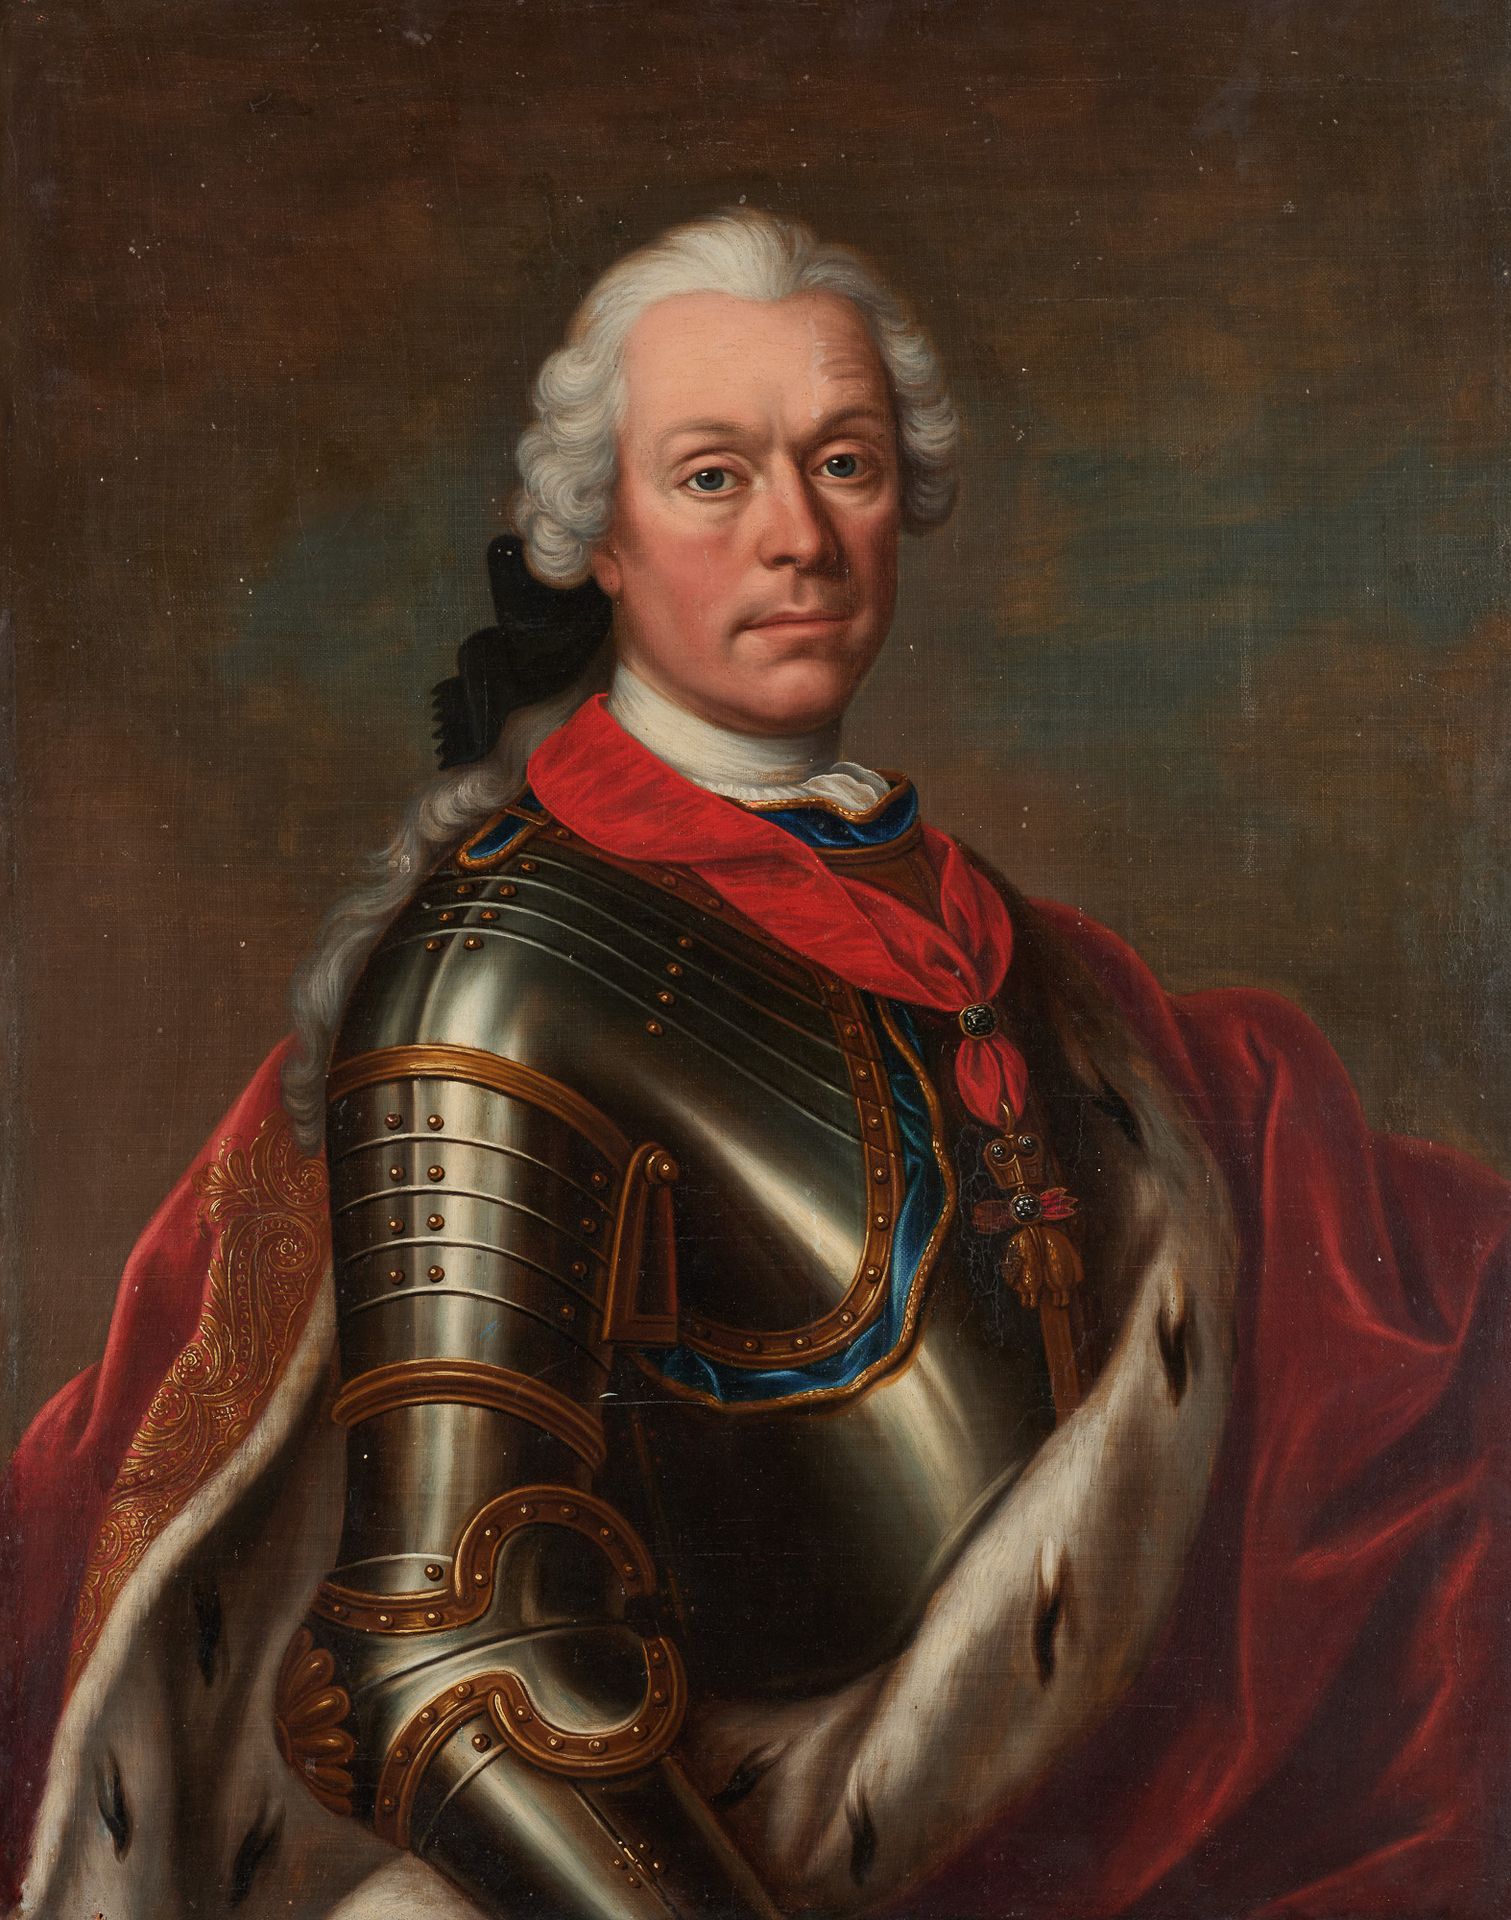 École flamande circa 1800. Oil on canvas: Portrait of a man in armor with the or&hellip;